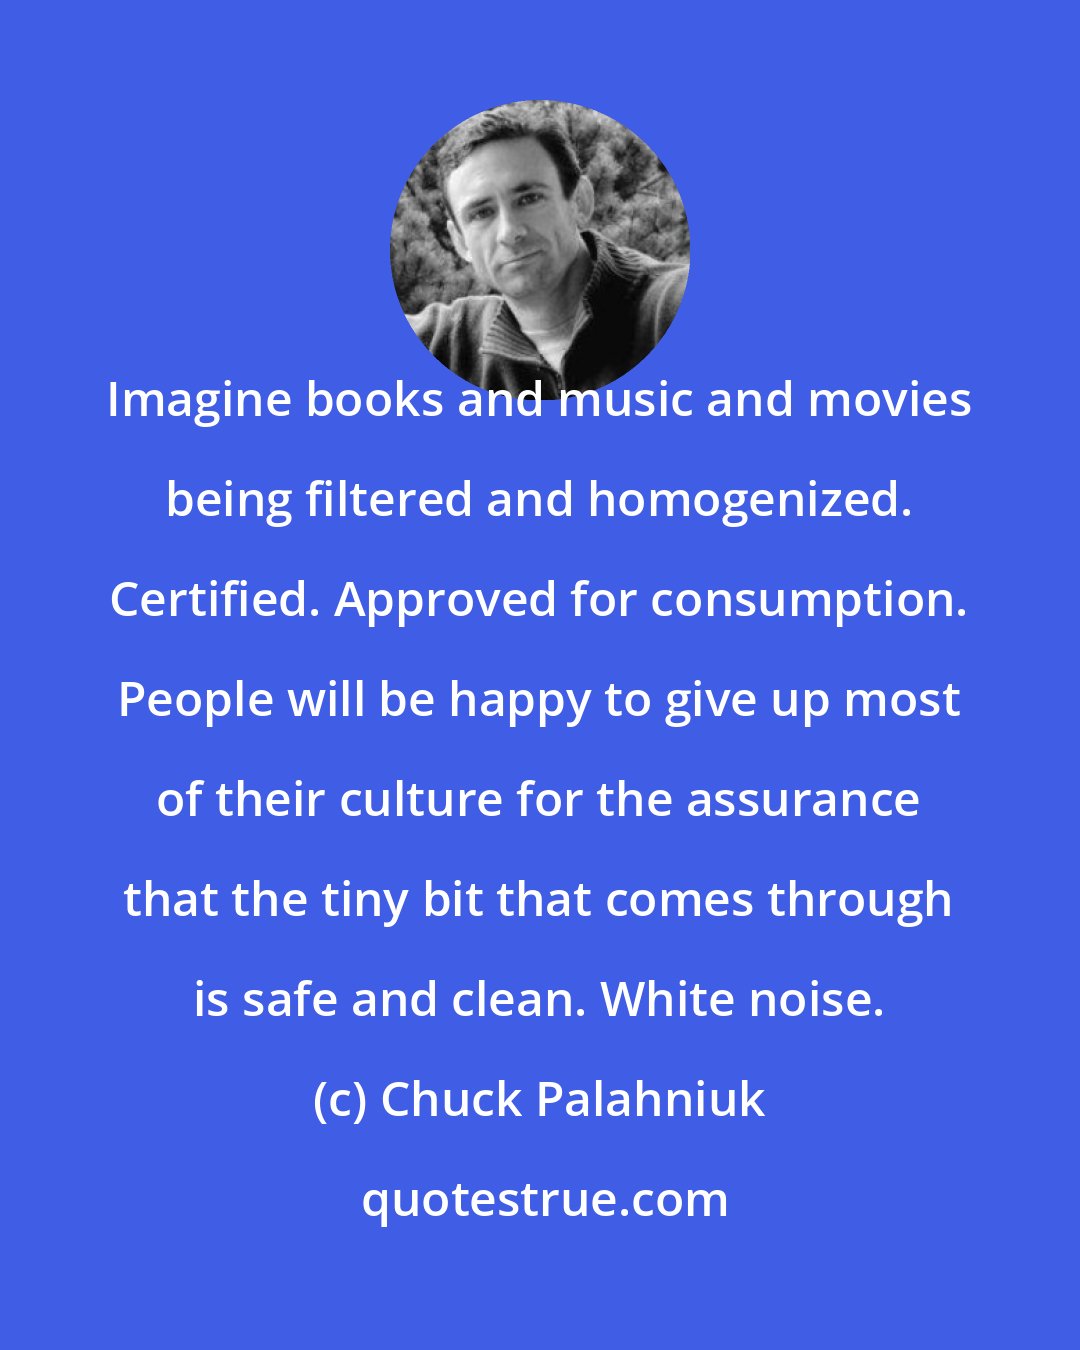 Chuck Palahniuk: Imagine books and music and movies being filtered and homogenized. Certified. Approved for consumption. People will be happy to give up most of their culture for the assurance that the tiny bit that comes through is safe and clean. White noise.